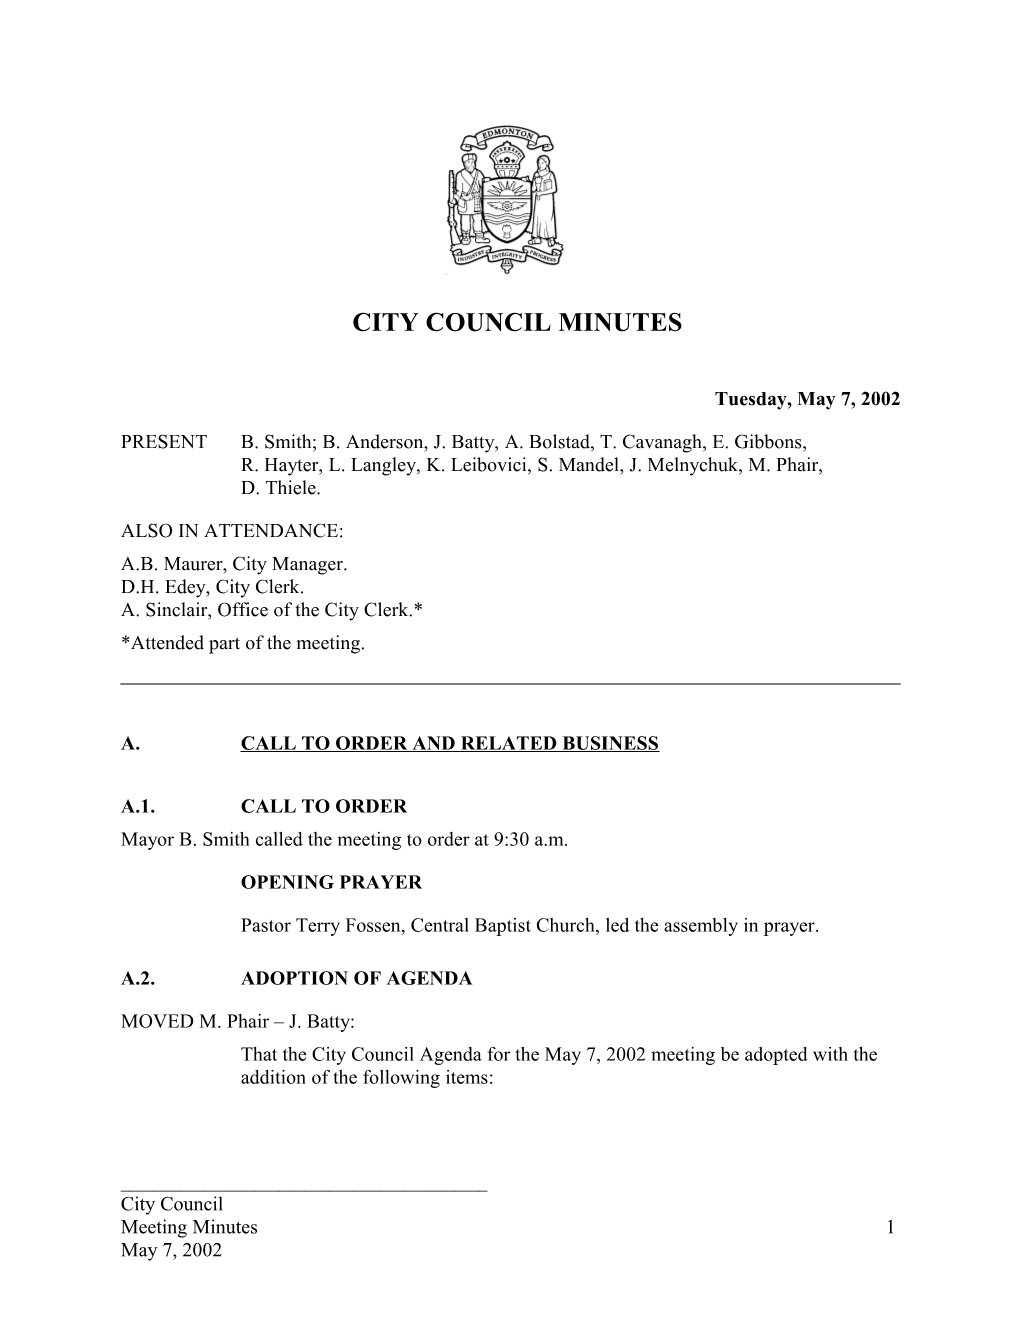 Minutes for City Council May 7, 2002 Meeting